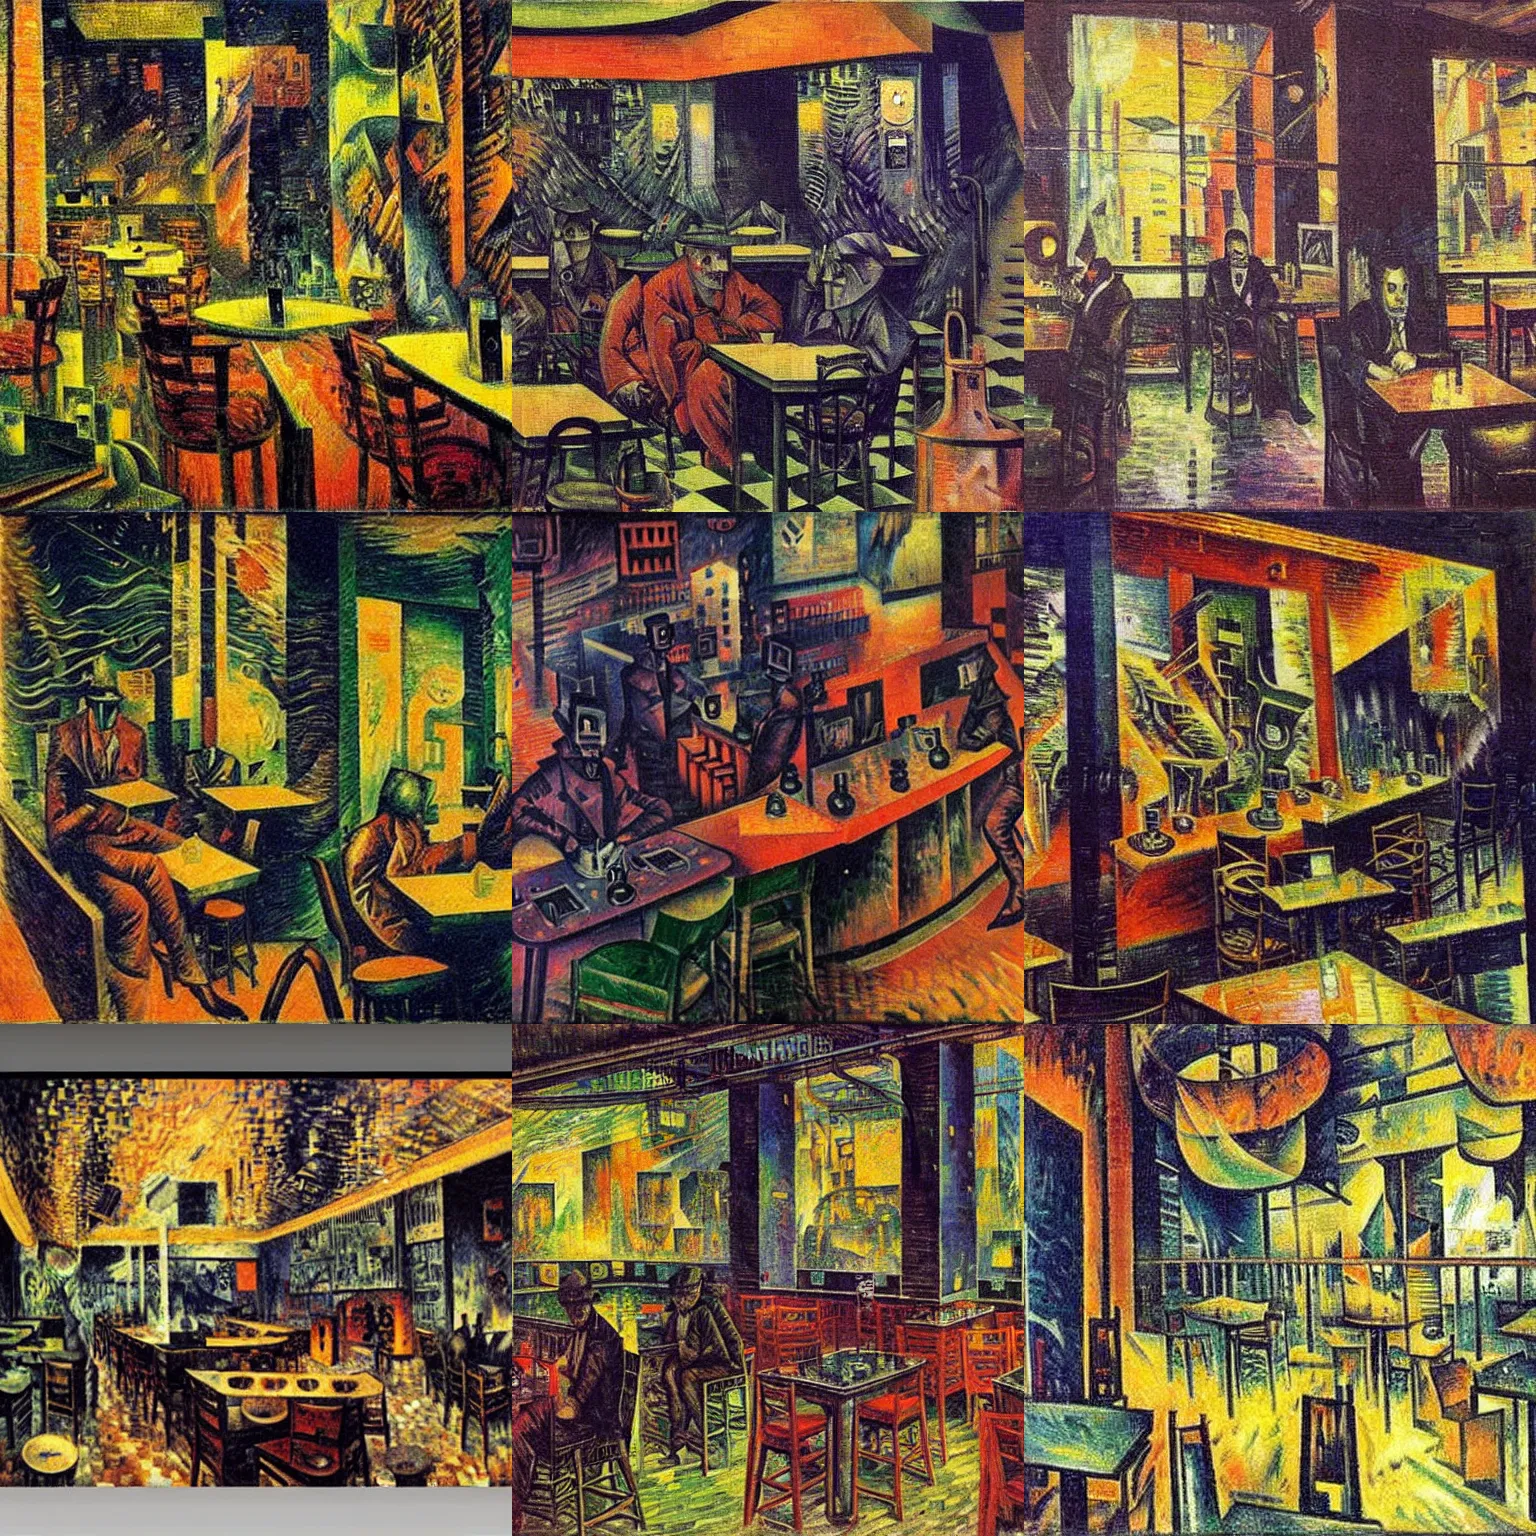 Prompt: A cyberpunk cafe painted by Umberto Boccioni